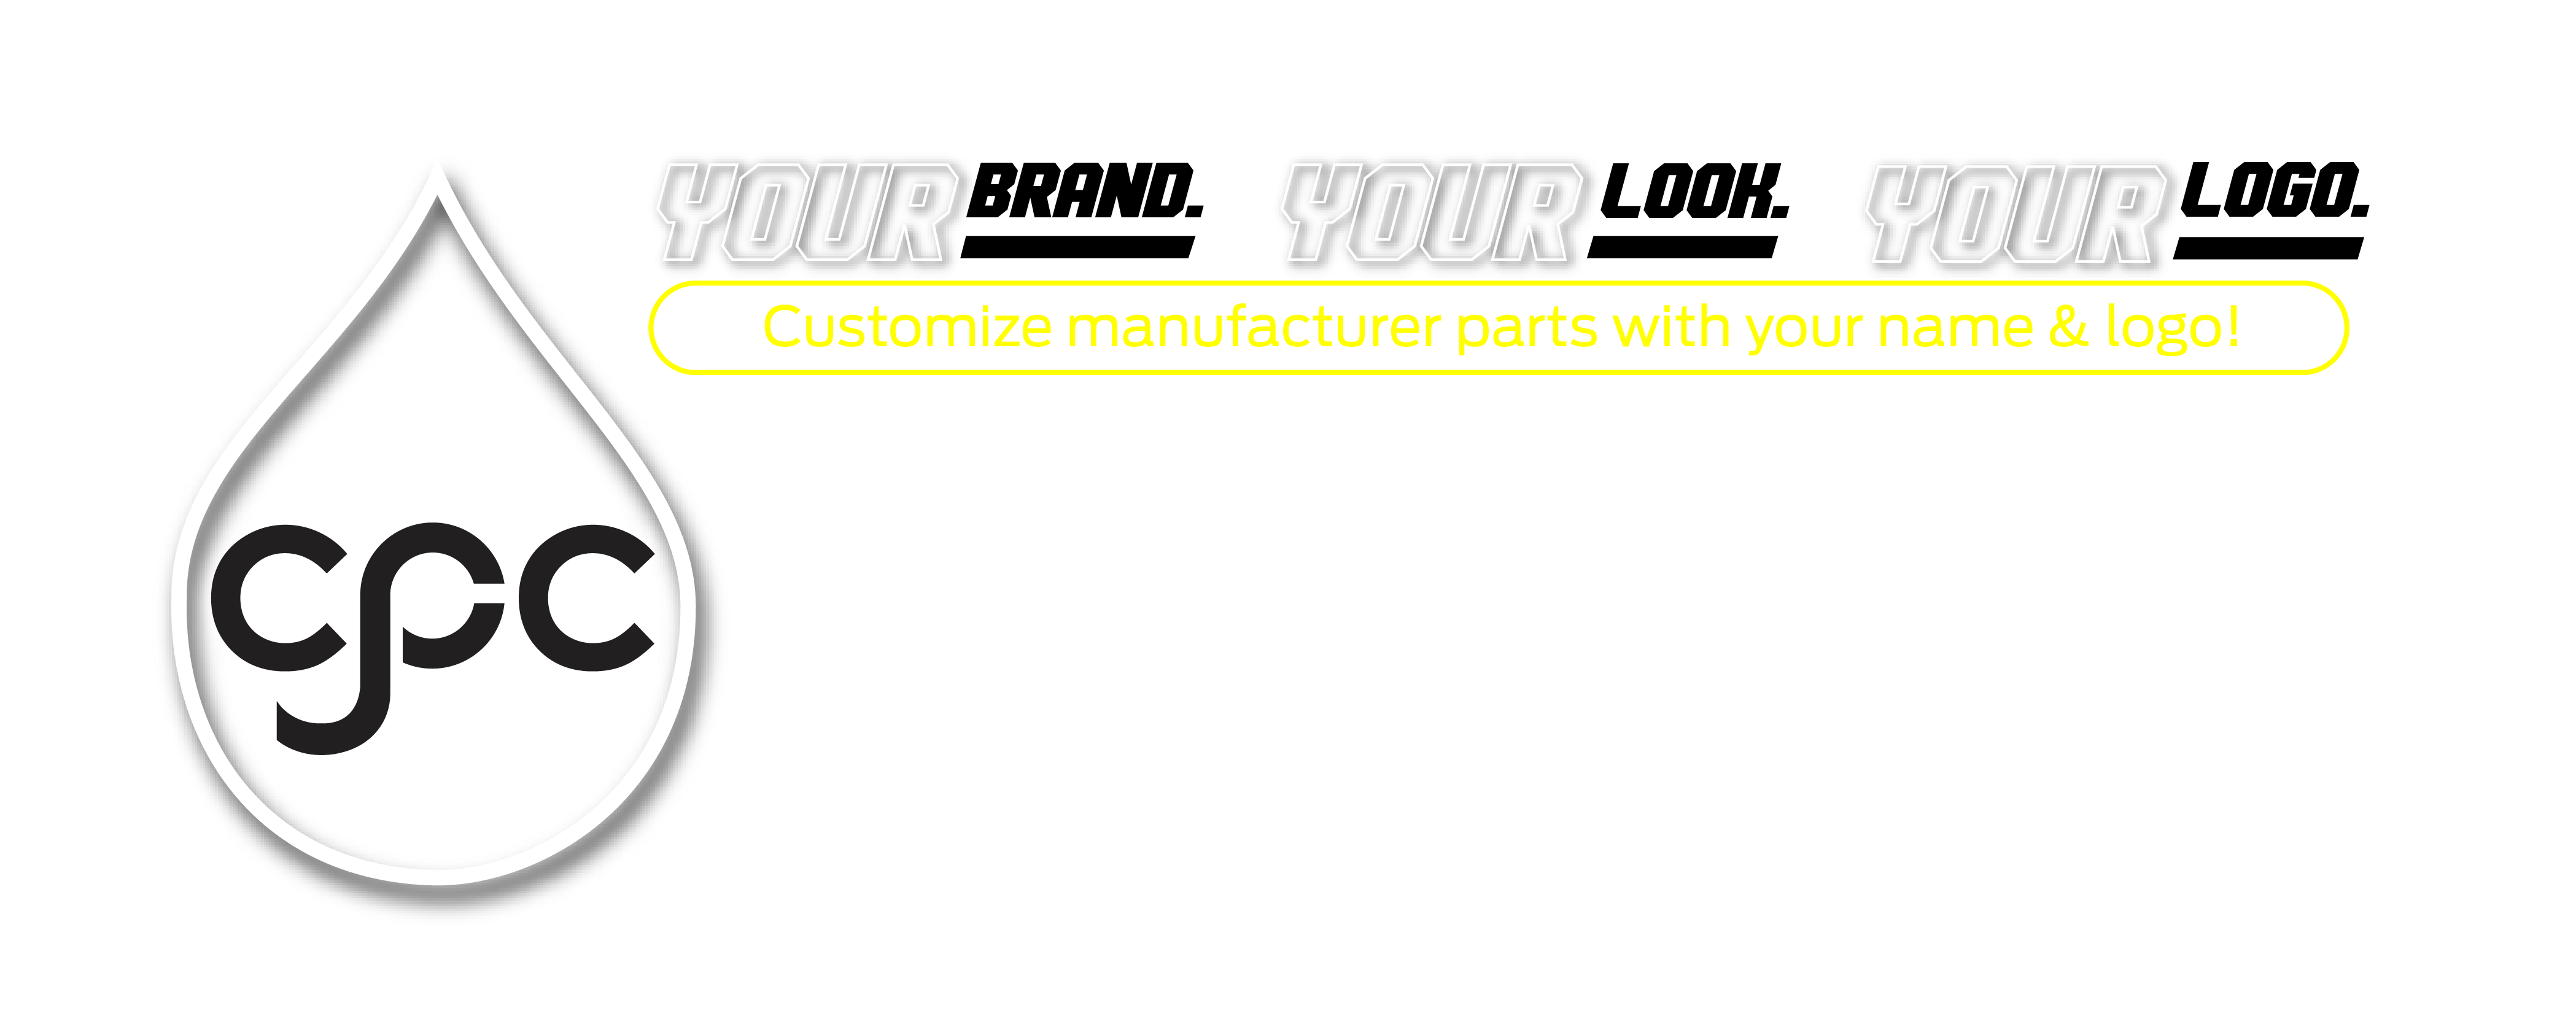 Your brand. Your look. Your logo.